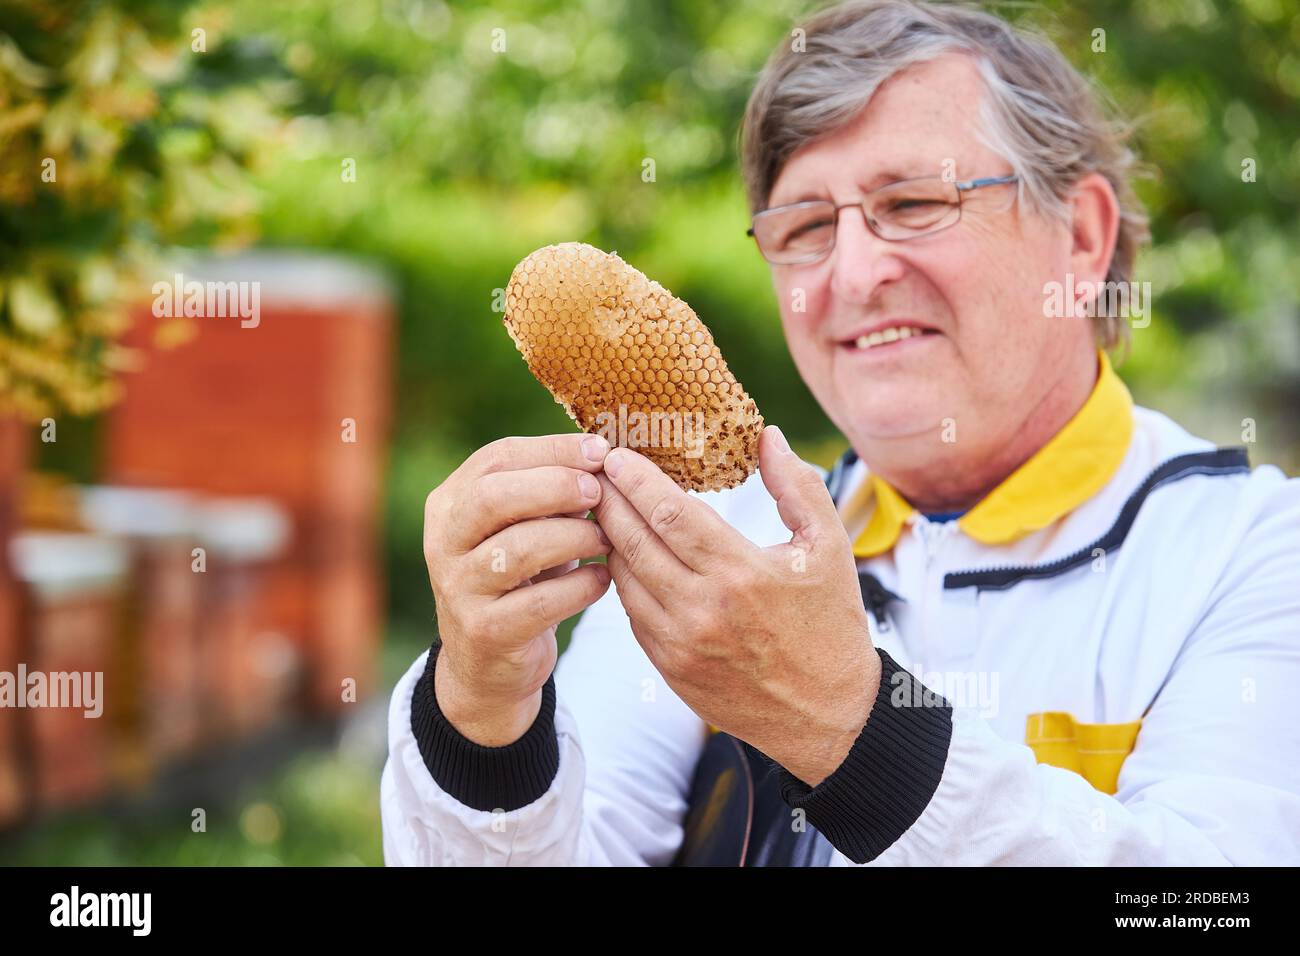 Smiling male apiarist analyzing honeycomb at apiary garden in summer Stock Photo